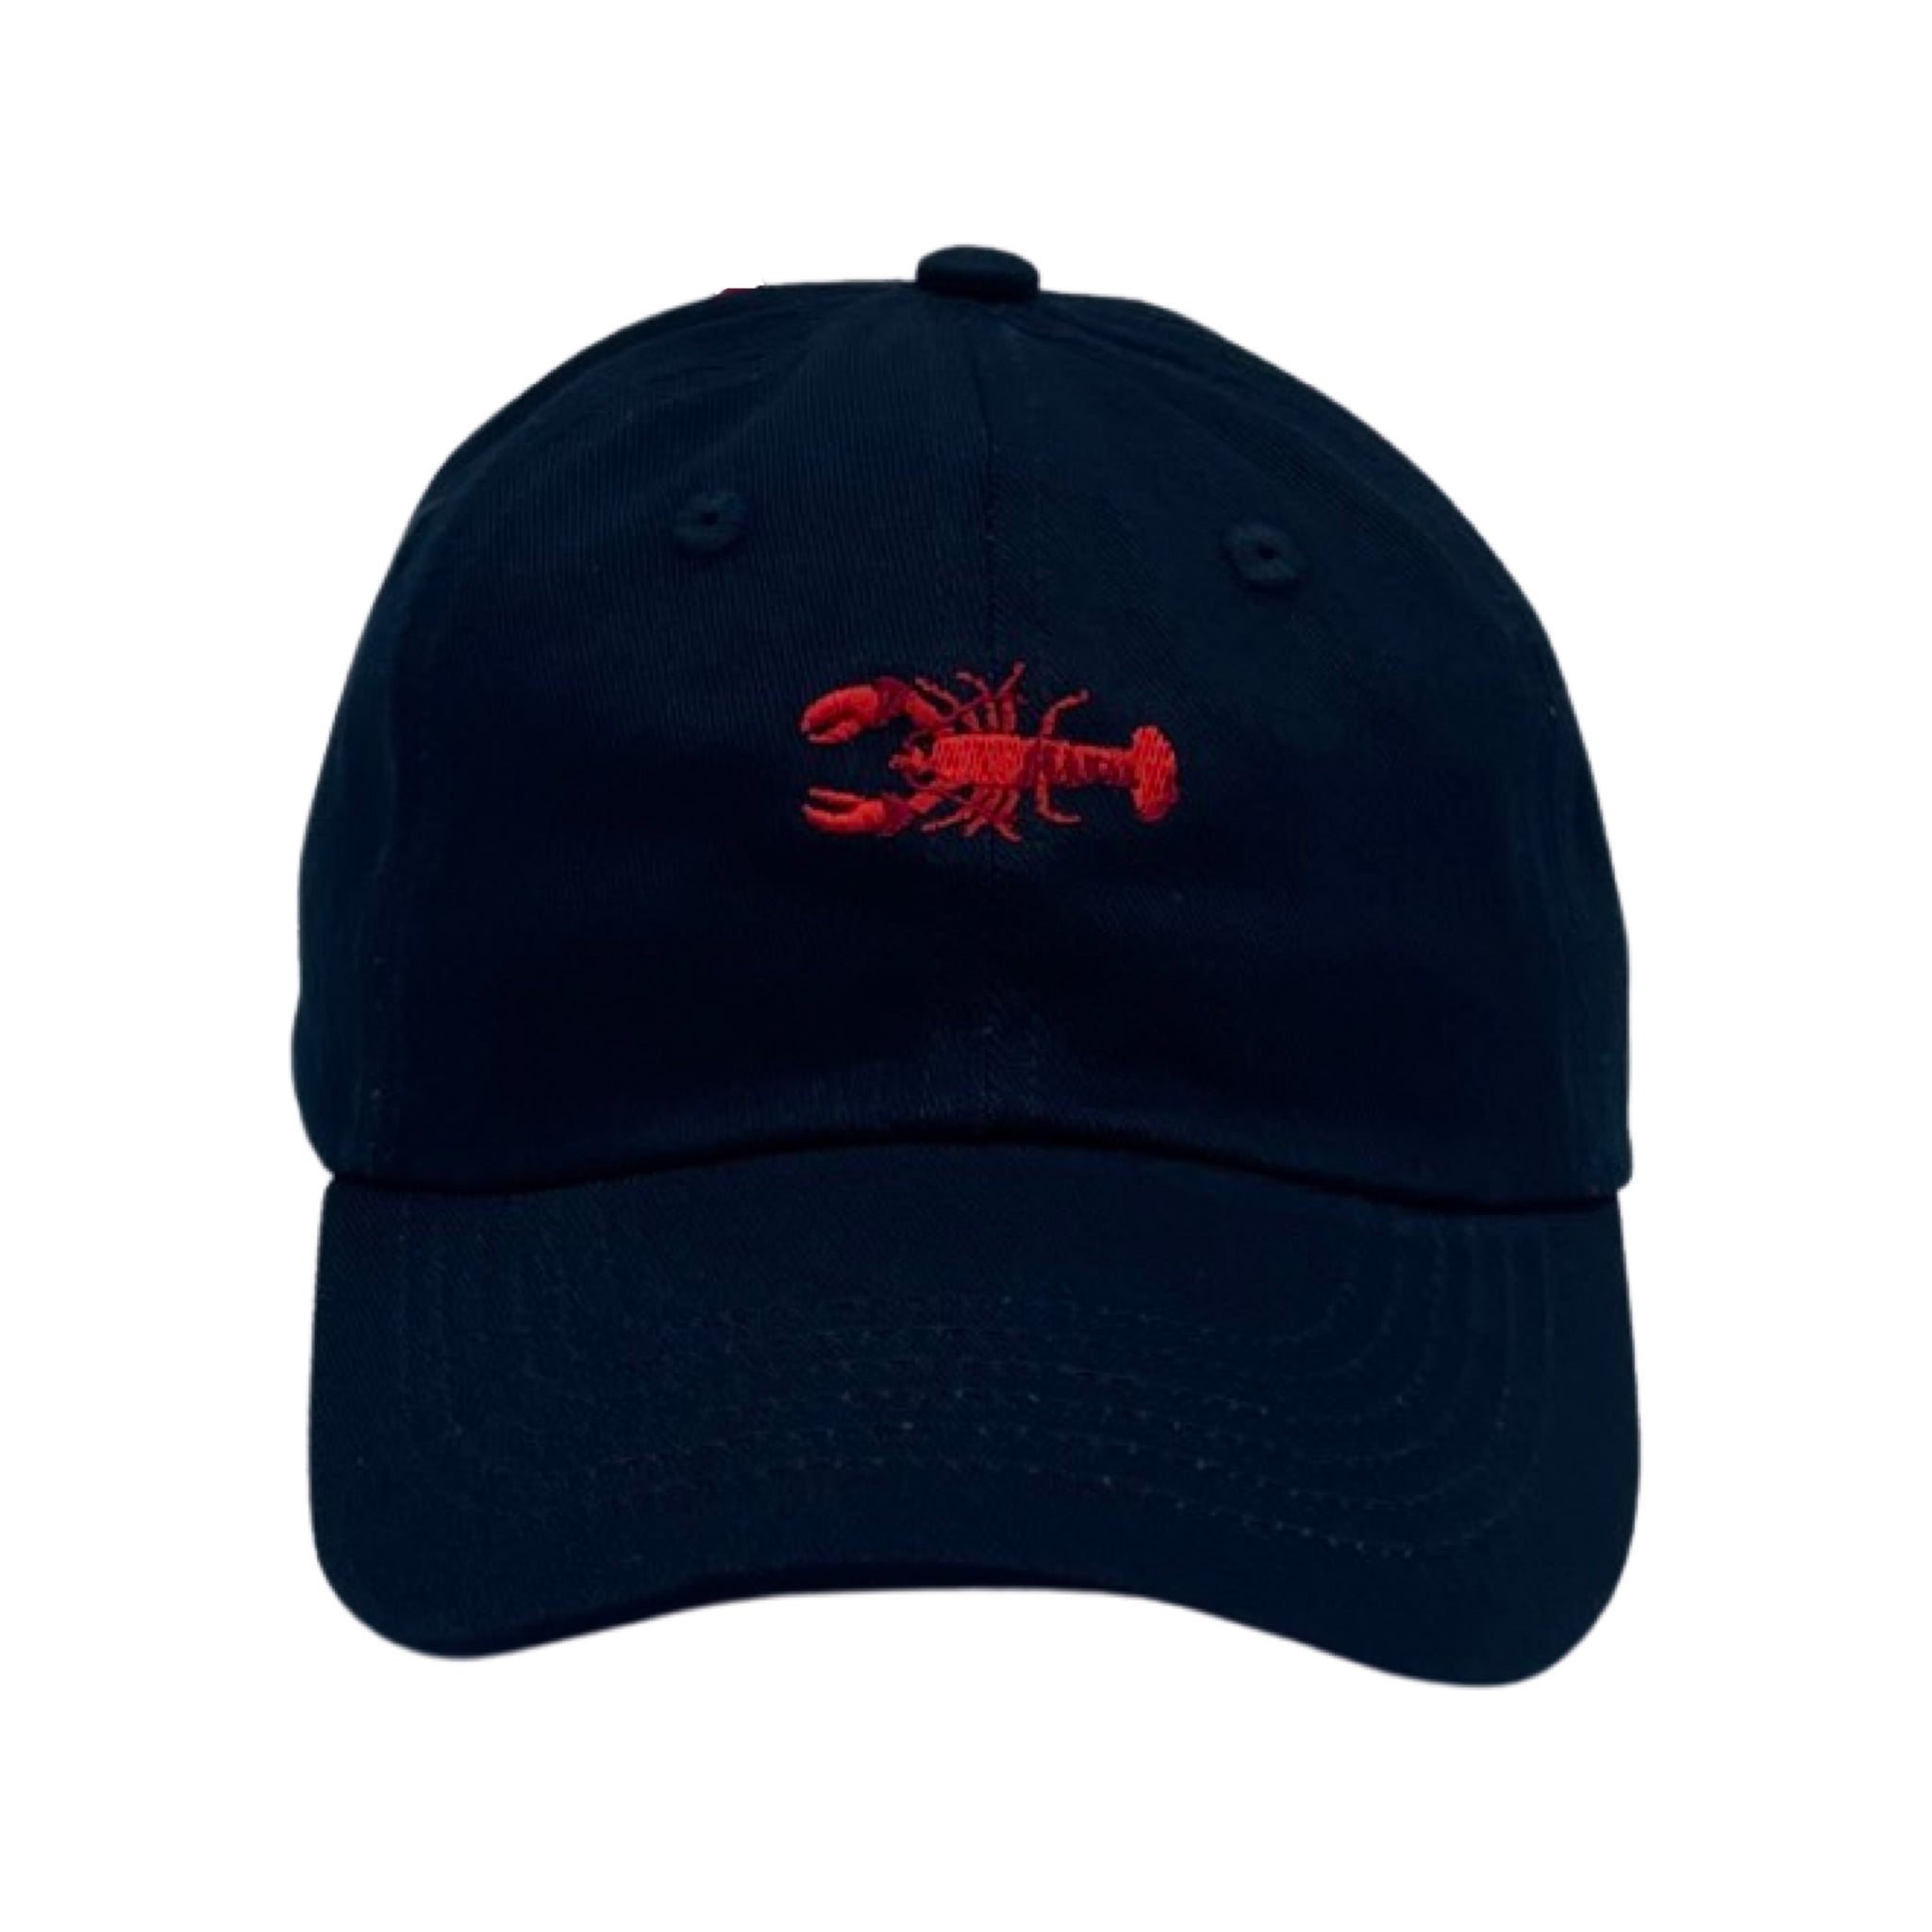 front of hat